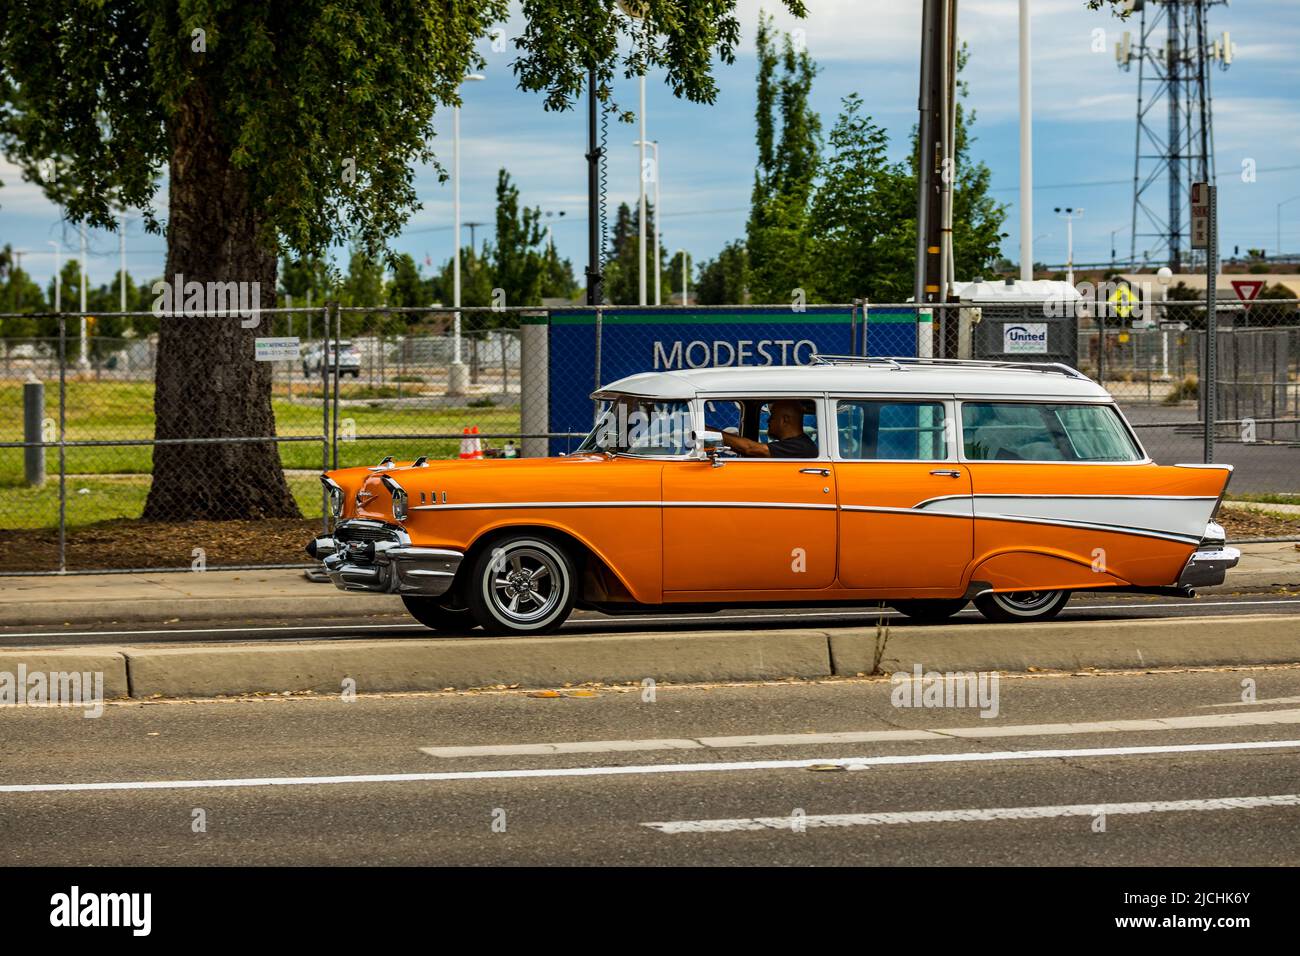 A 1957 Chevrolet station wagon arrives at the American Graffiti charity Car Show at the Modesto Junior College campus June 11-12 2022 Stock Photo